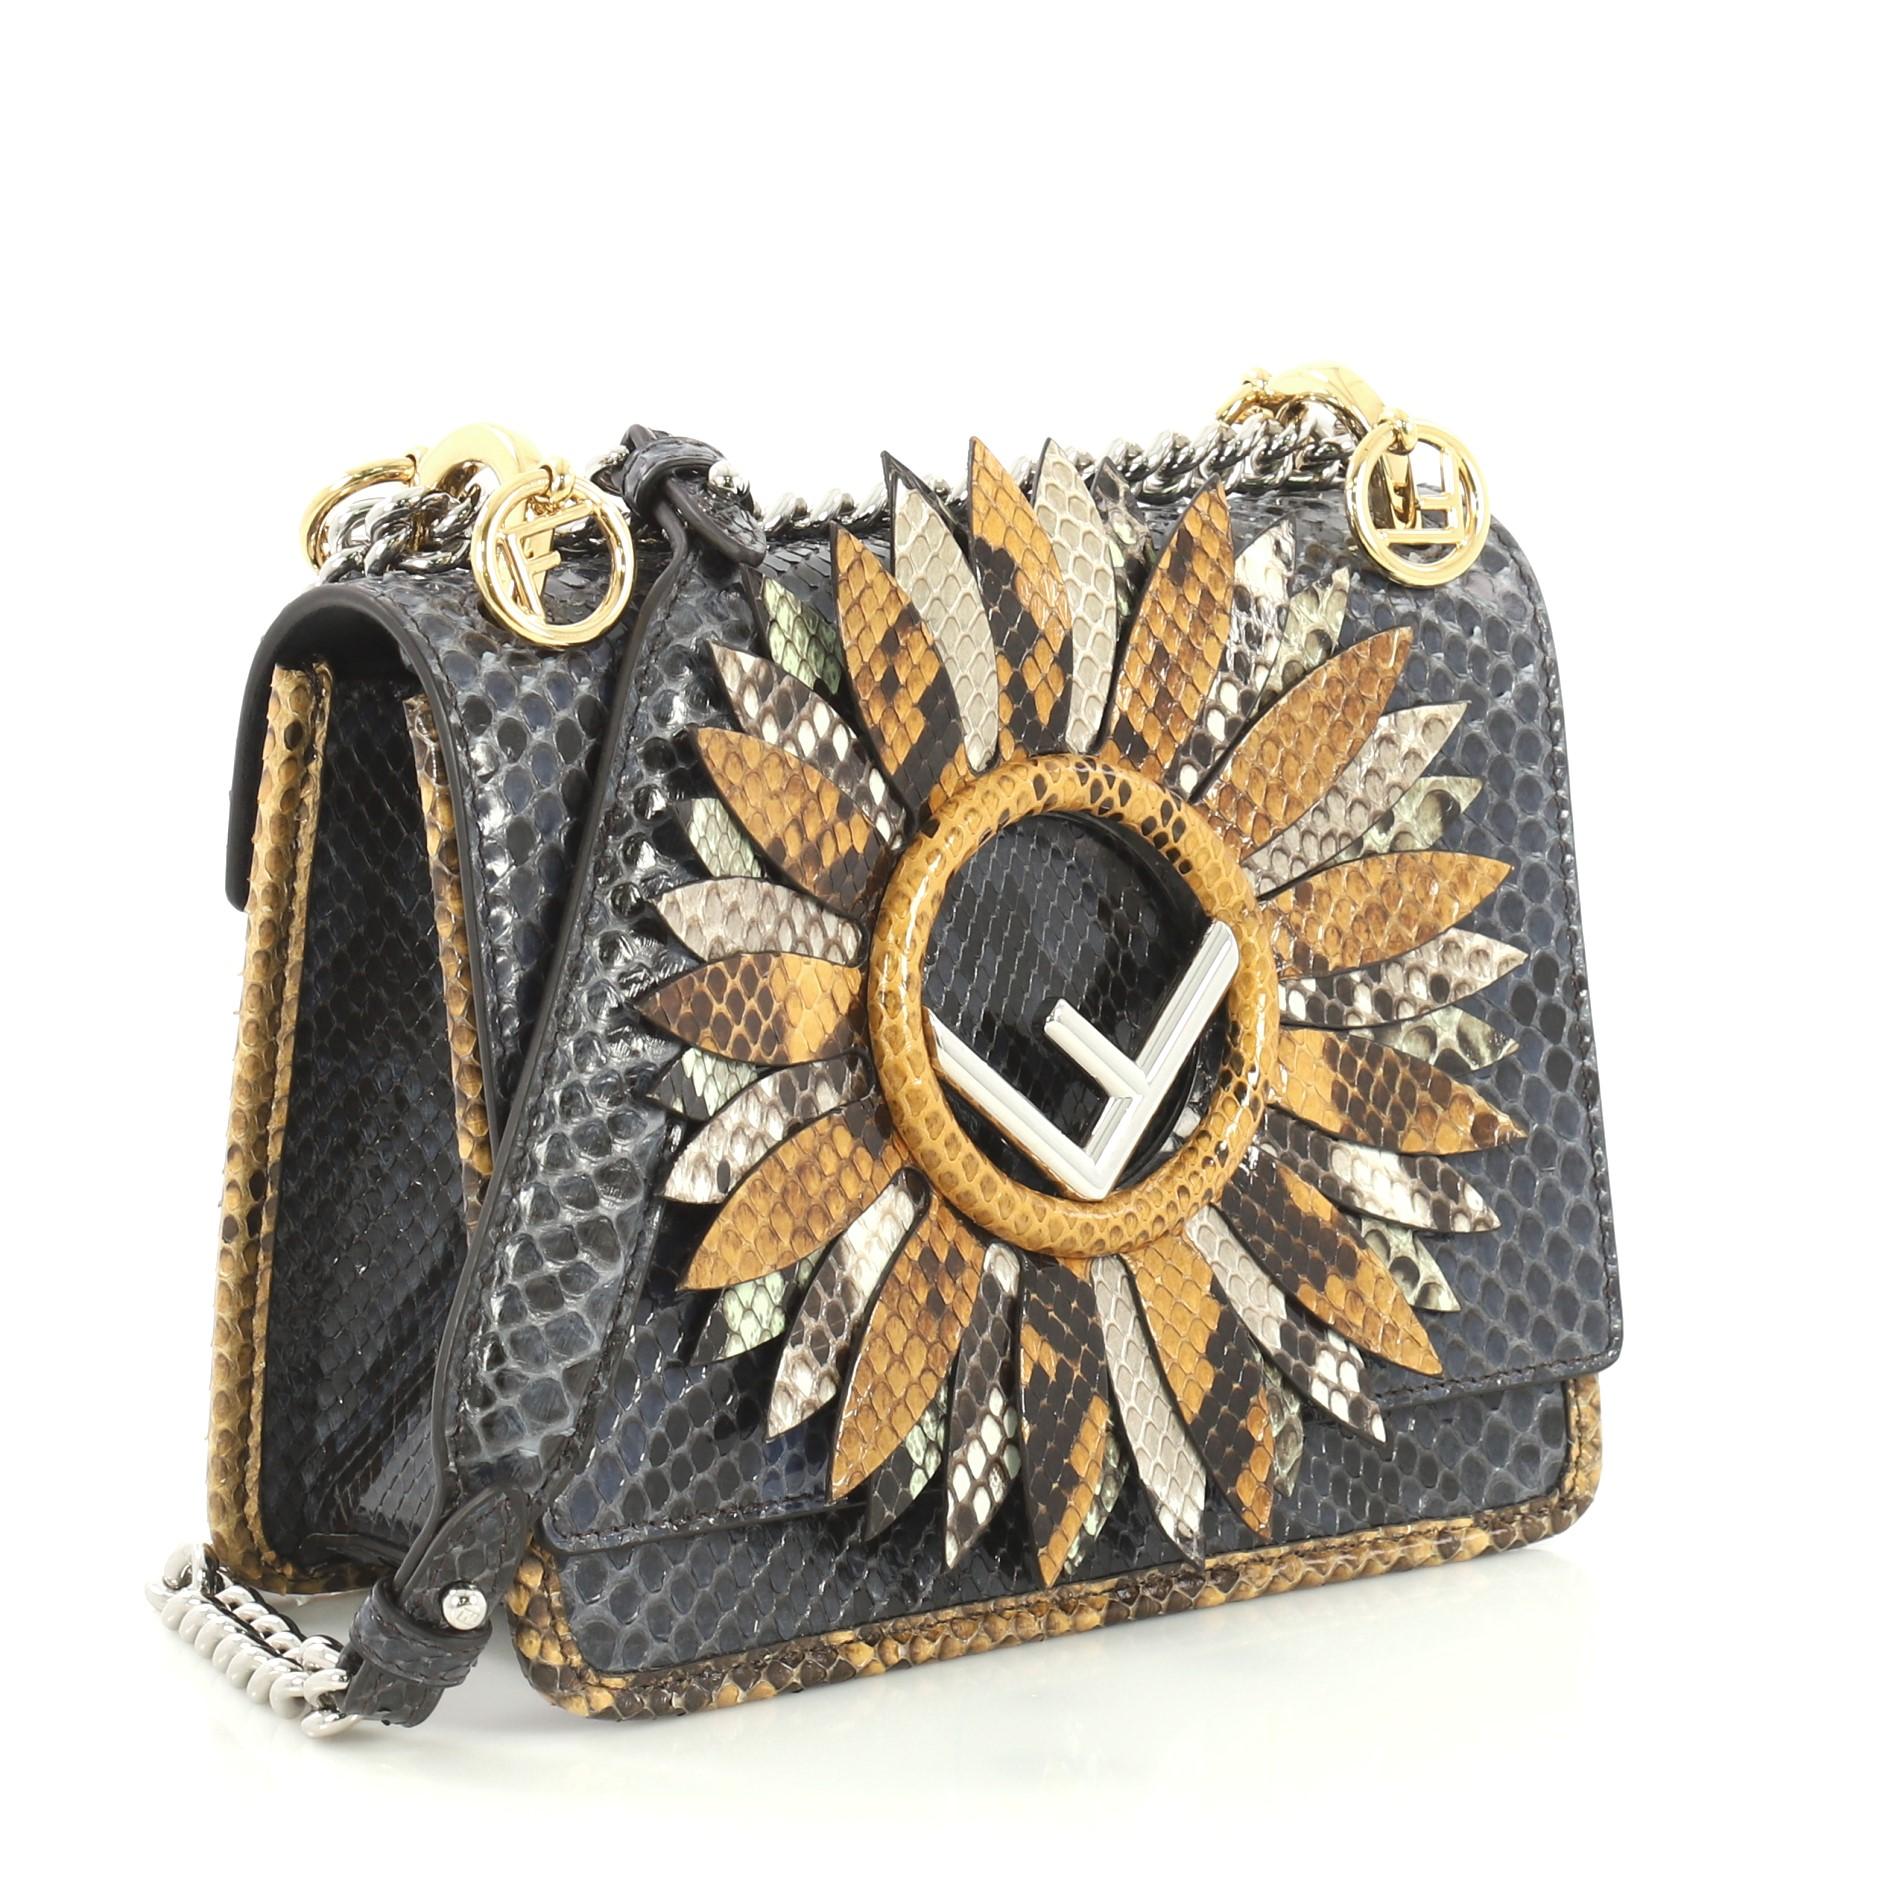 This Fendi Kan I F Shoulder Bag Embellished Python Small, crafted from genuine blue python, features a chain link strap with shoulder pad, Fendi logo, and silver-tone hardware. Its magnetic snap closure opens to a blue microfiber interior with slip